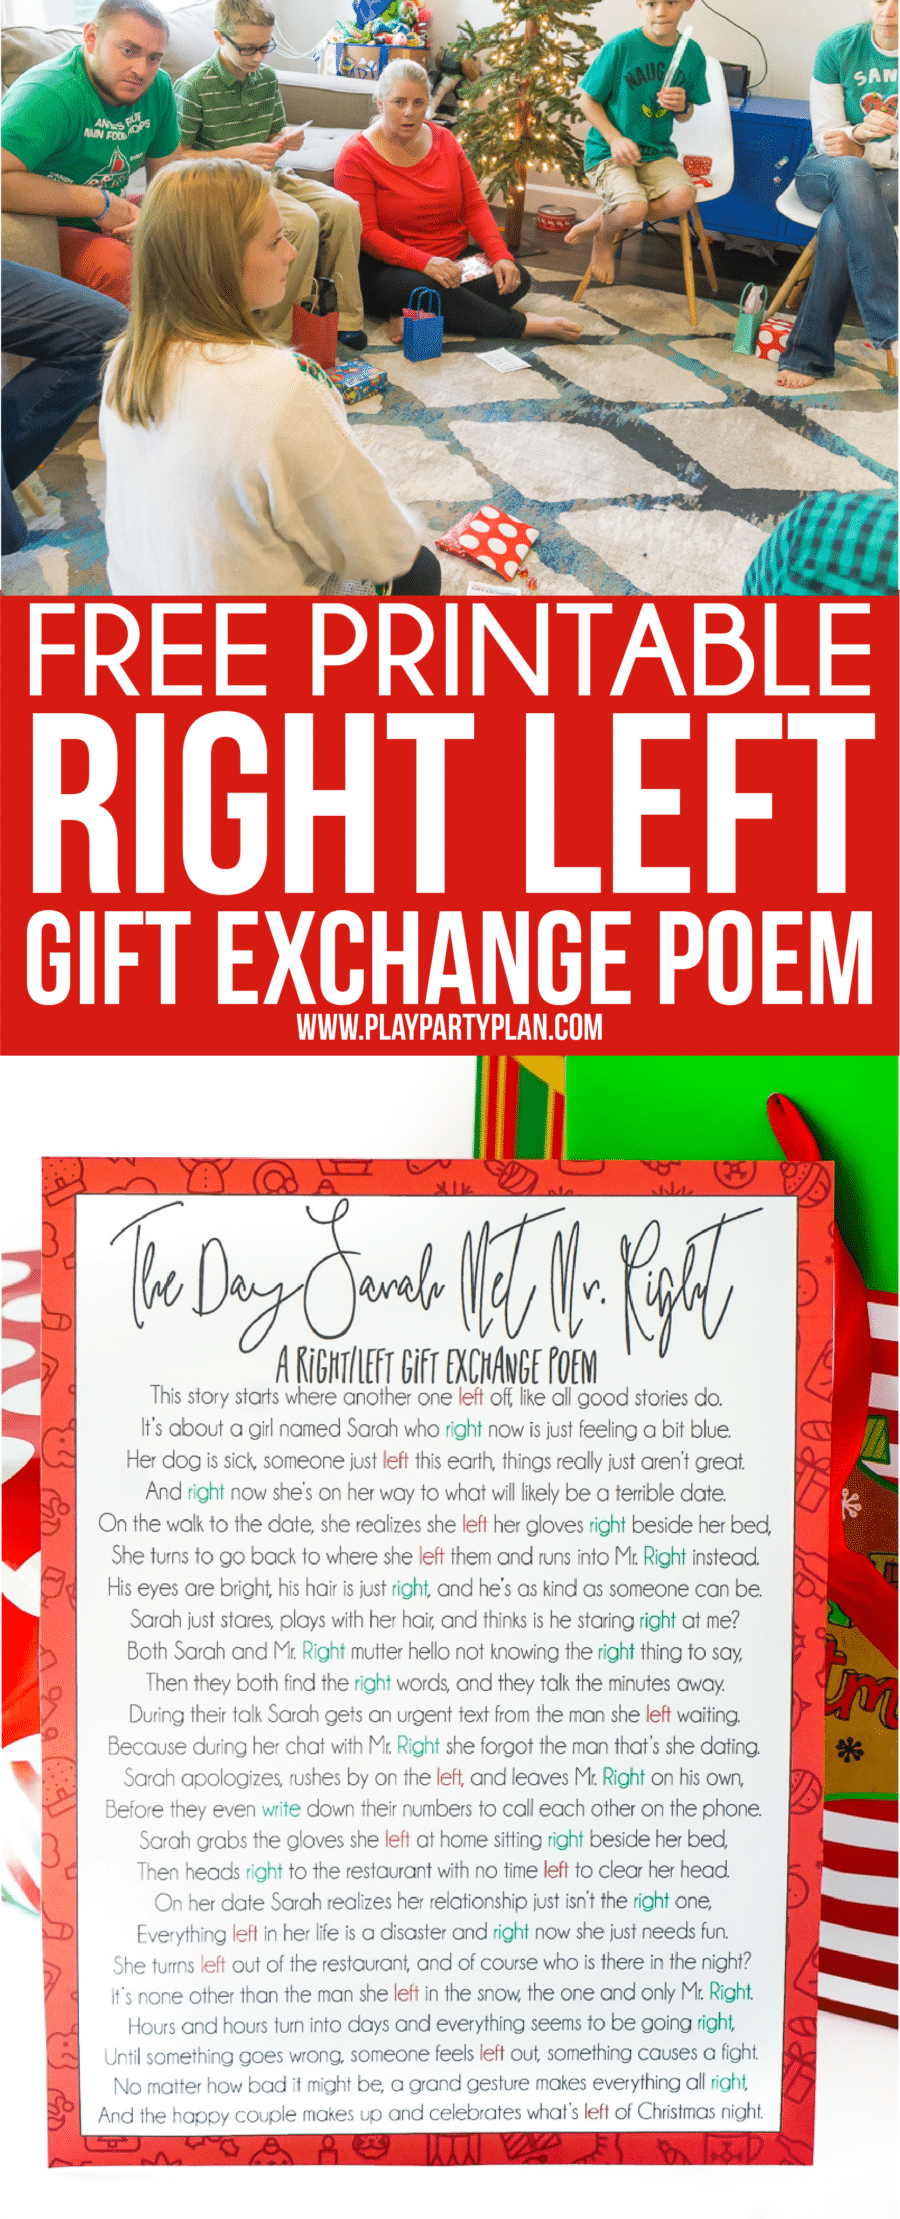 A Hilarious Left Right Christmas Poem &amp;amp; Gift Game - Play Party Plan - Free Printable Left Right Game